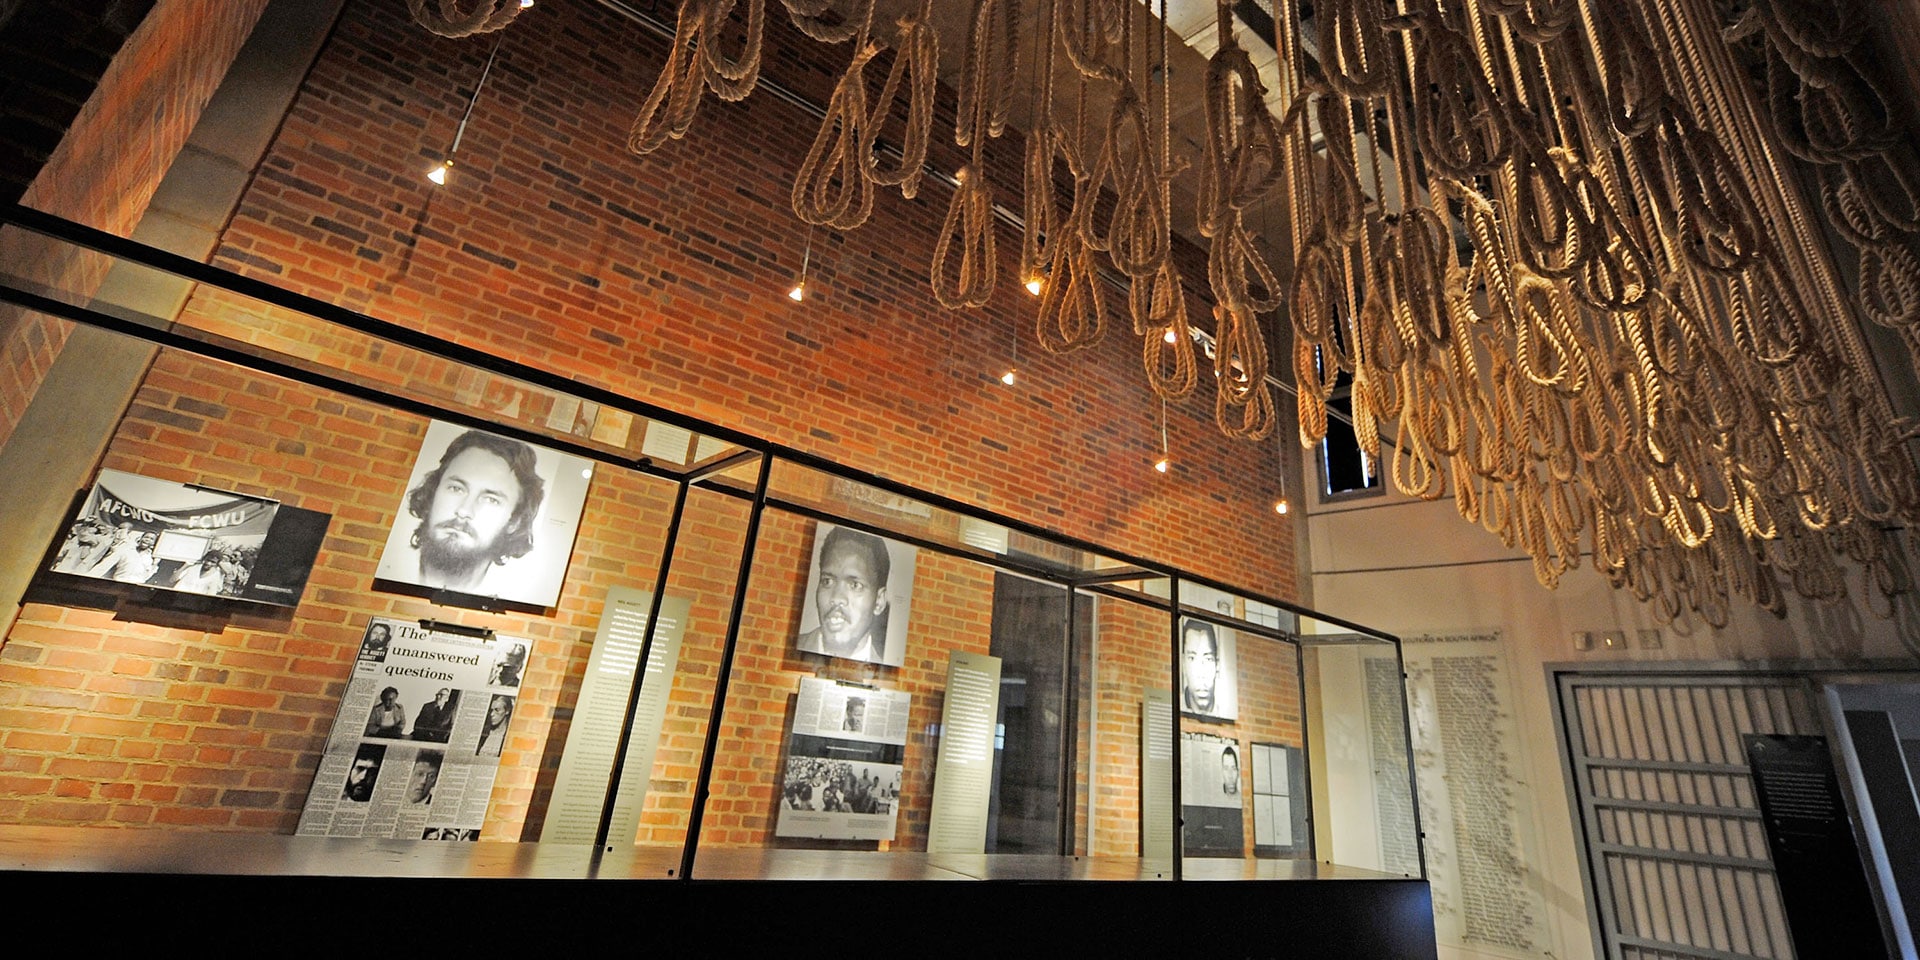 Visitors can see a range of exhibits, including historical photographs, films, and personal accounts of the apartheid era.